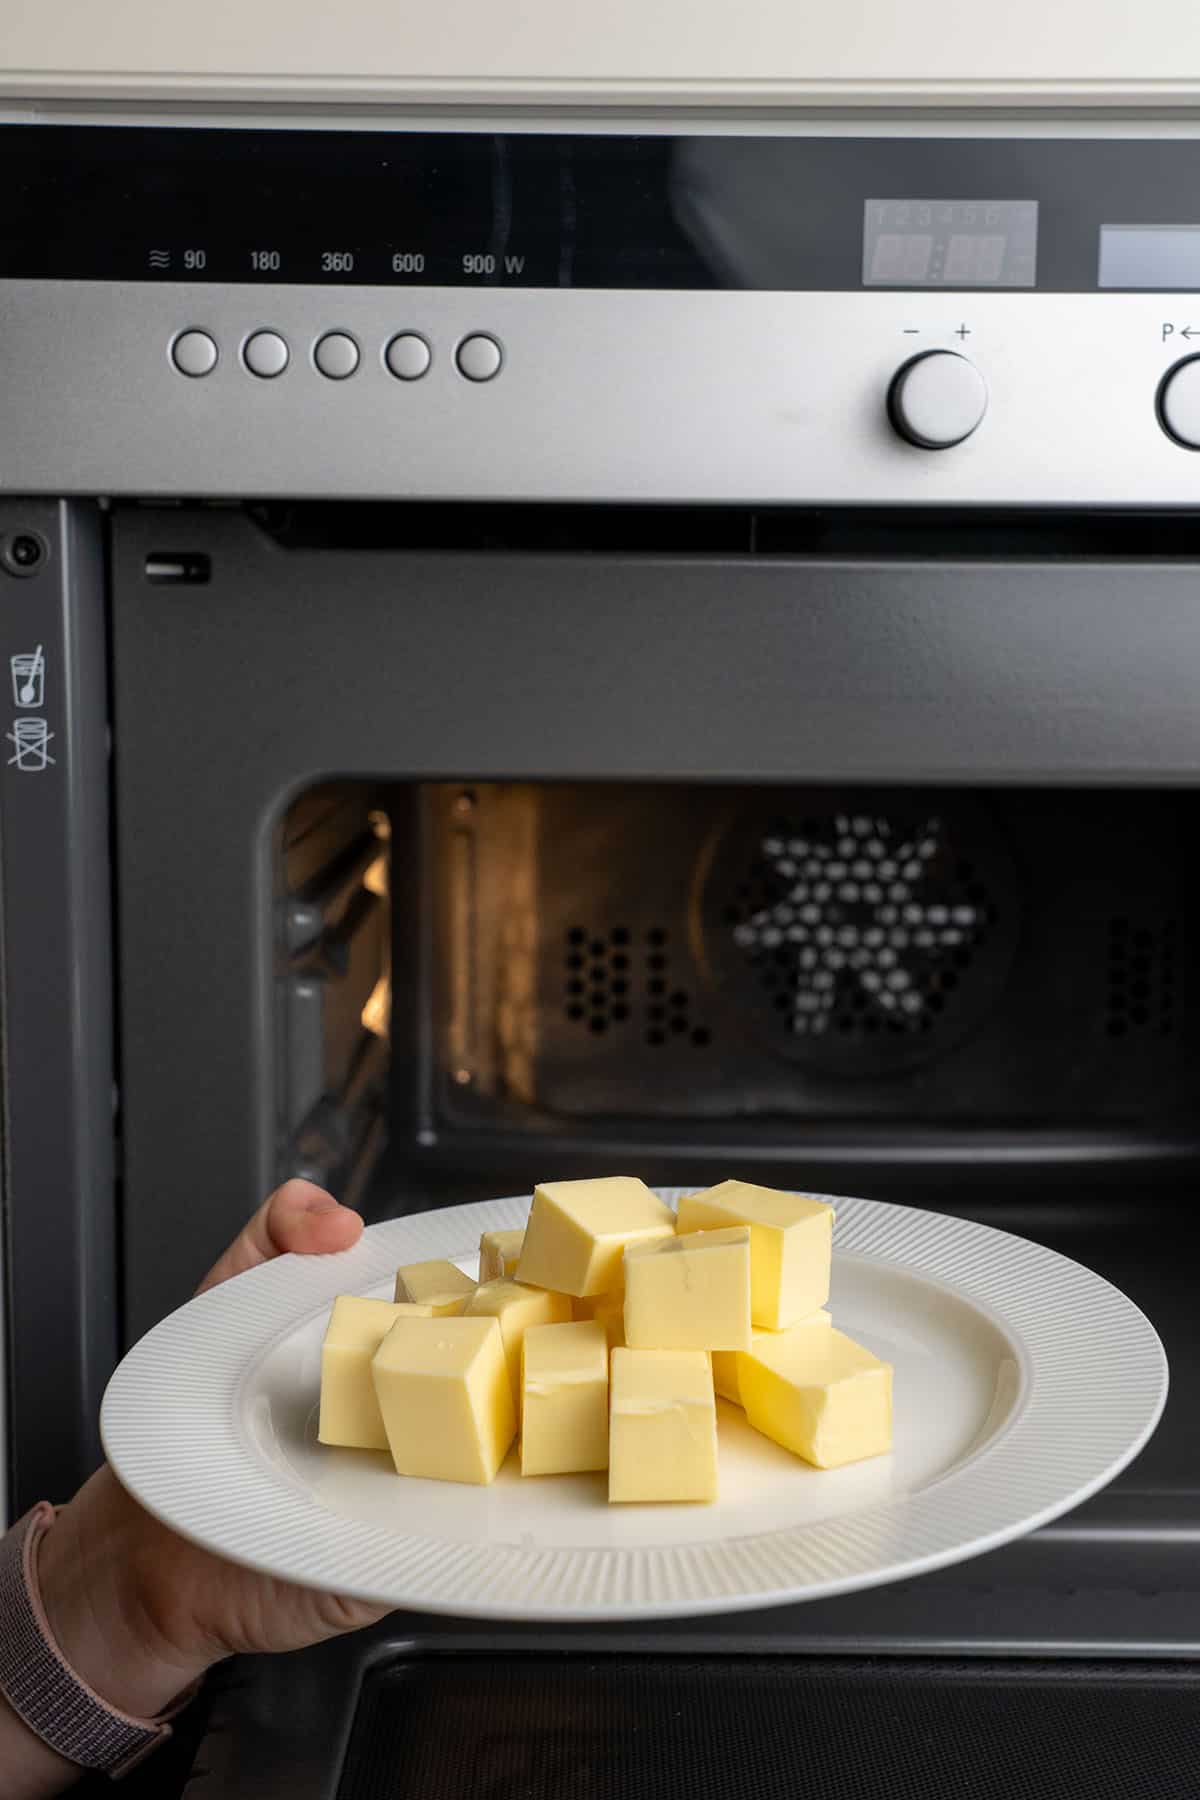 Putting butter cubes on a plate into a microwave.